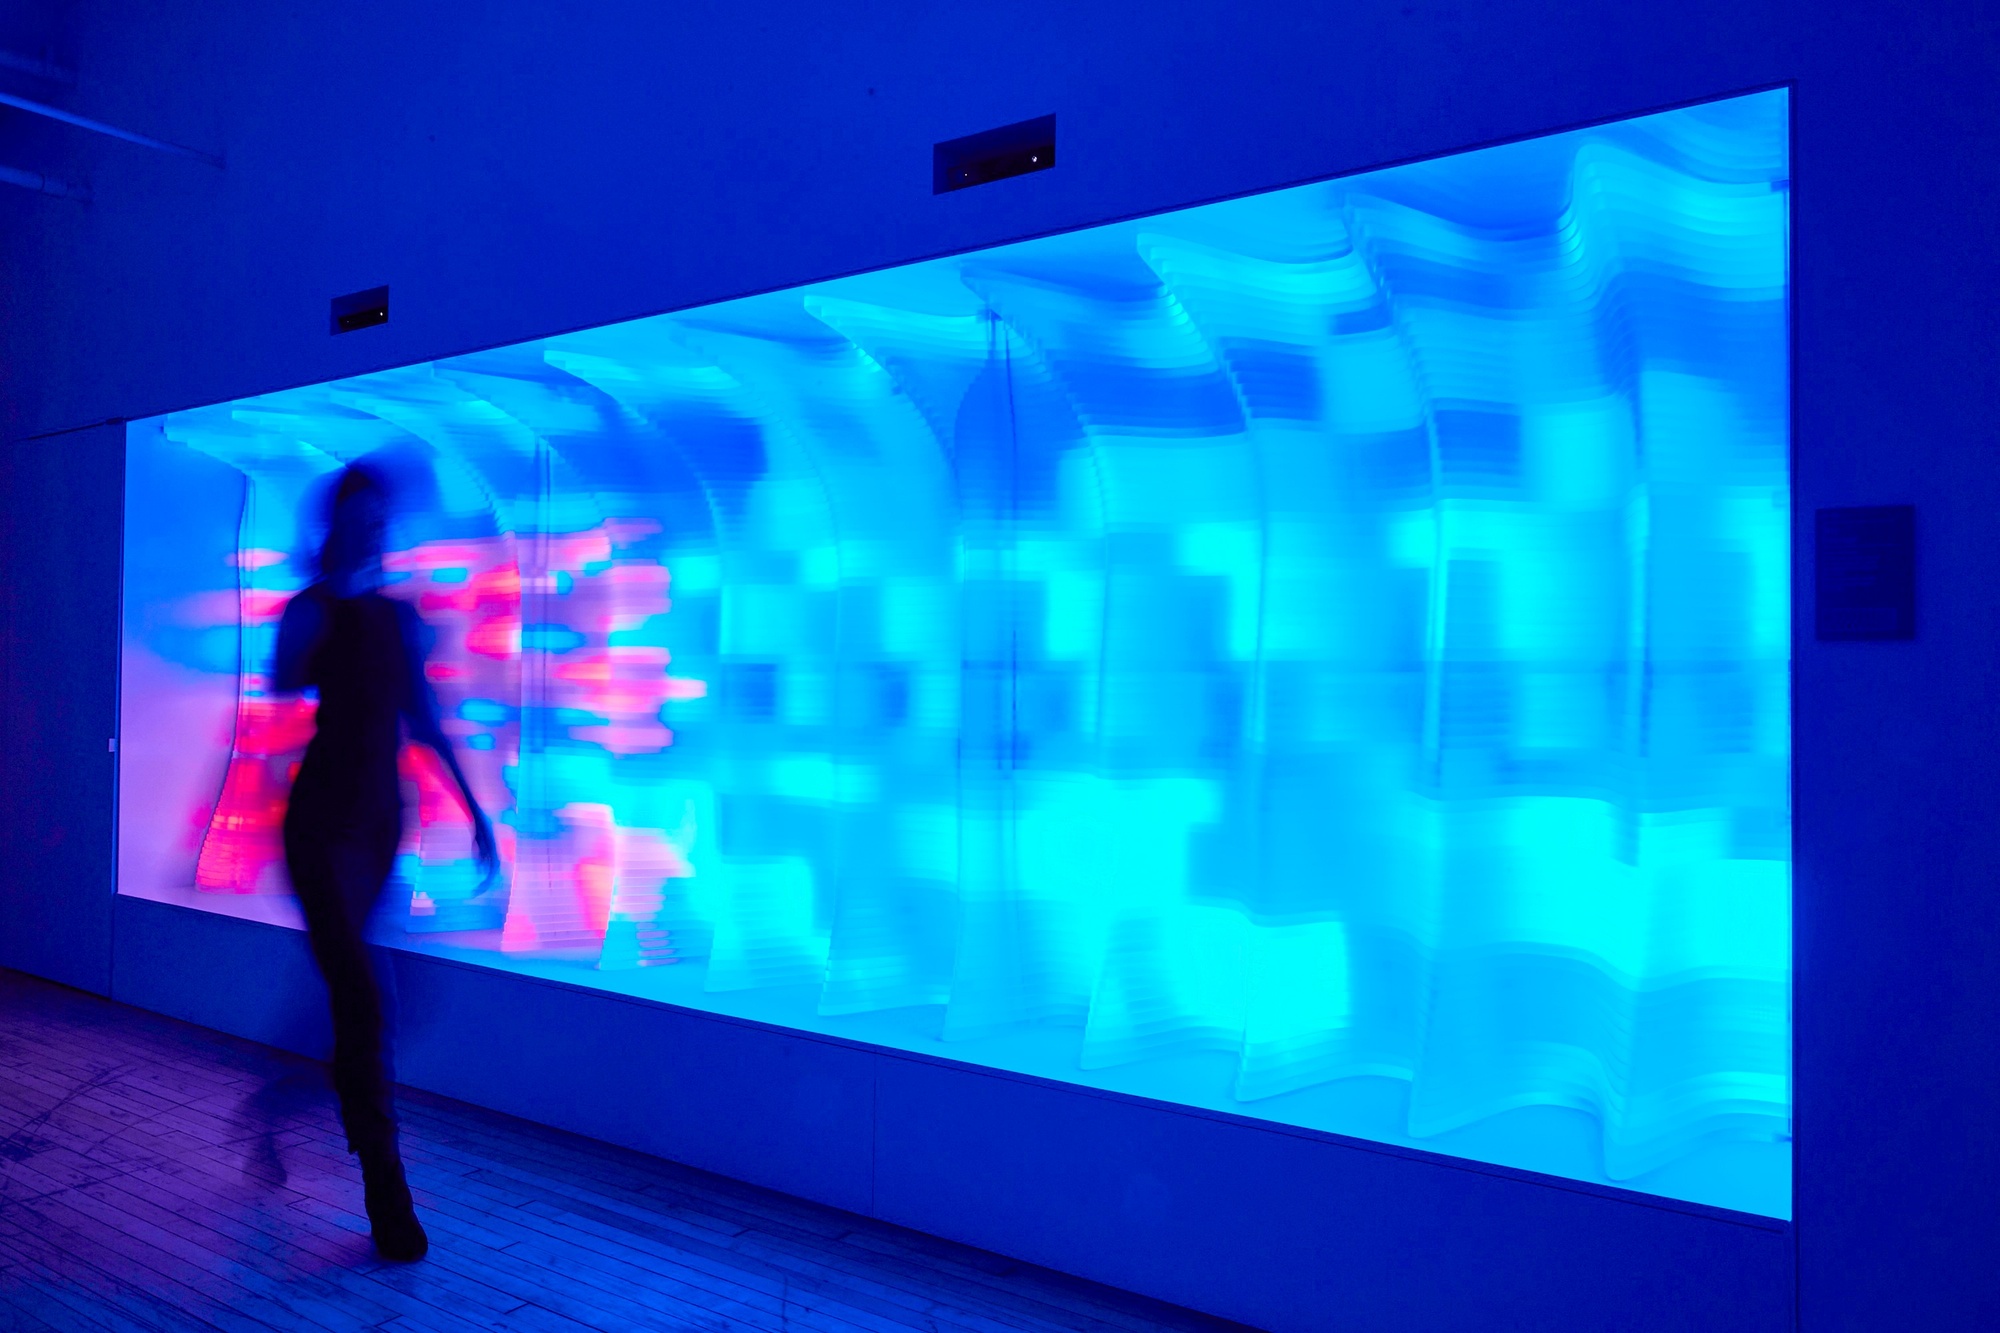 A blurred person walking past The Passage, which glows pink and blue in its artistic visualisation